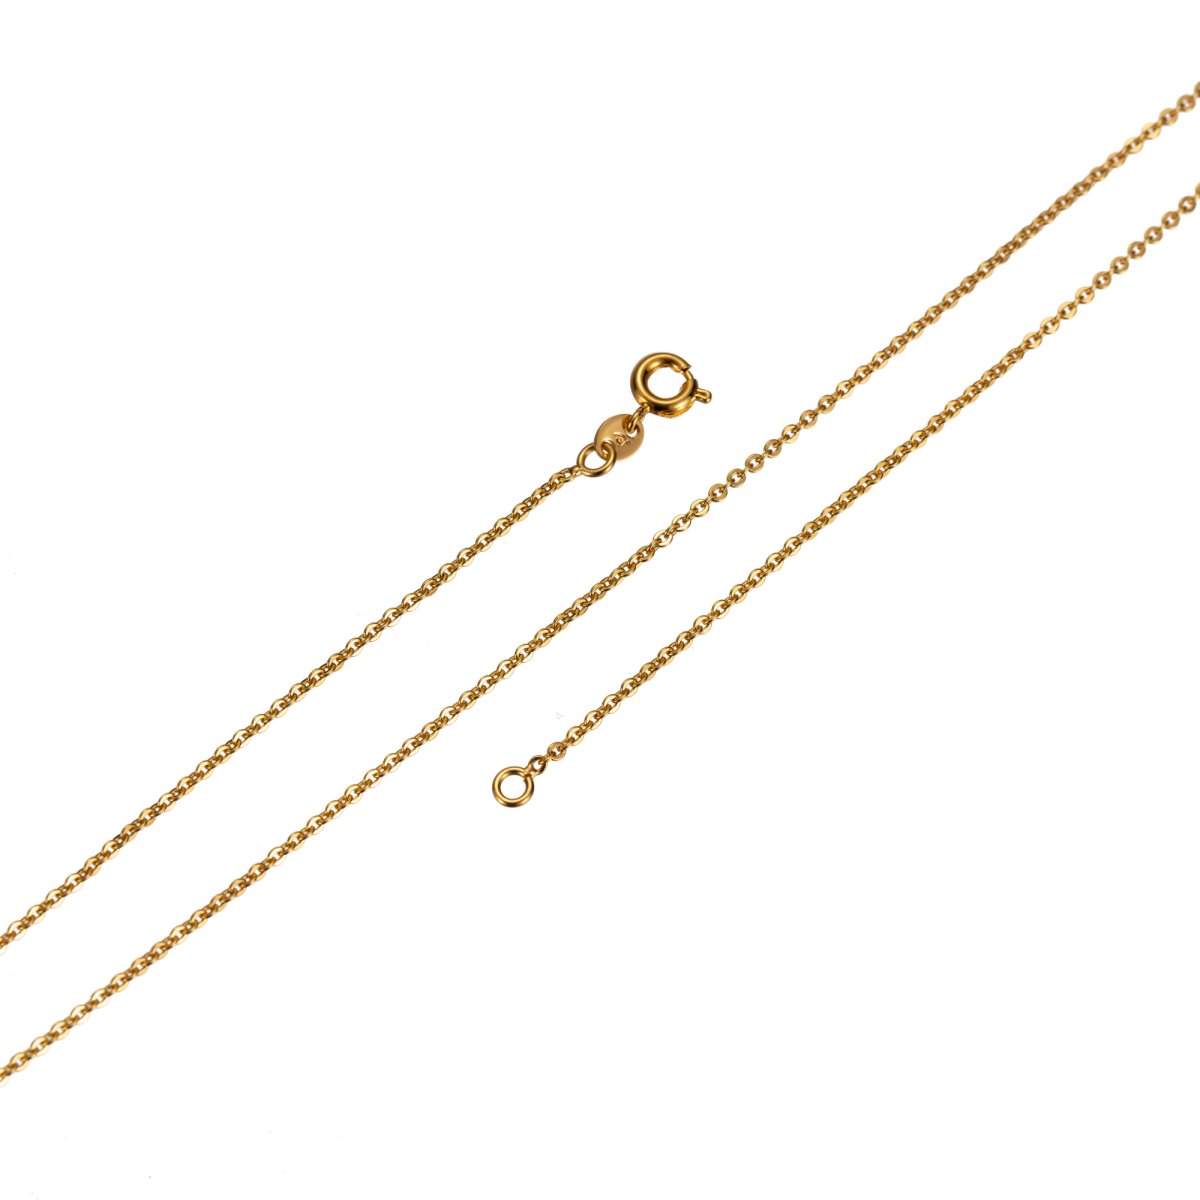 17.7'' Ready to Use 24K Gold Filled Thin Rolo Necklace Chain, Layering Rolo Chain Dainty Necklace, For Pendant Charm Necklace Making, Dainty 0.8mm Rolo Necklace w/ Spring Rings | CN-465 - DLUXCA